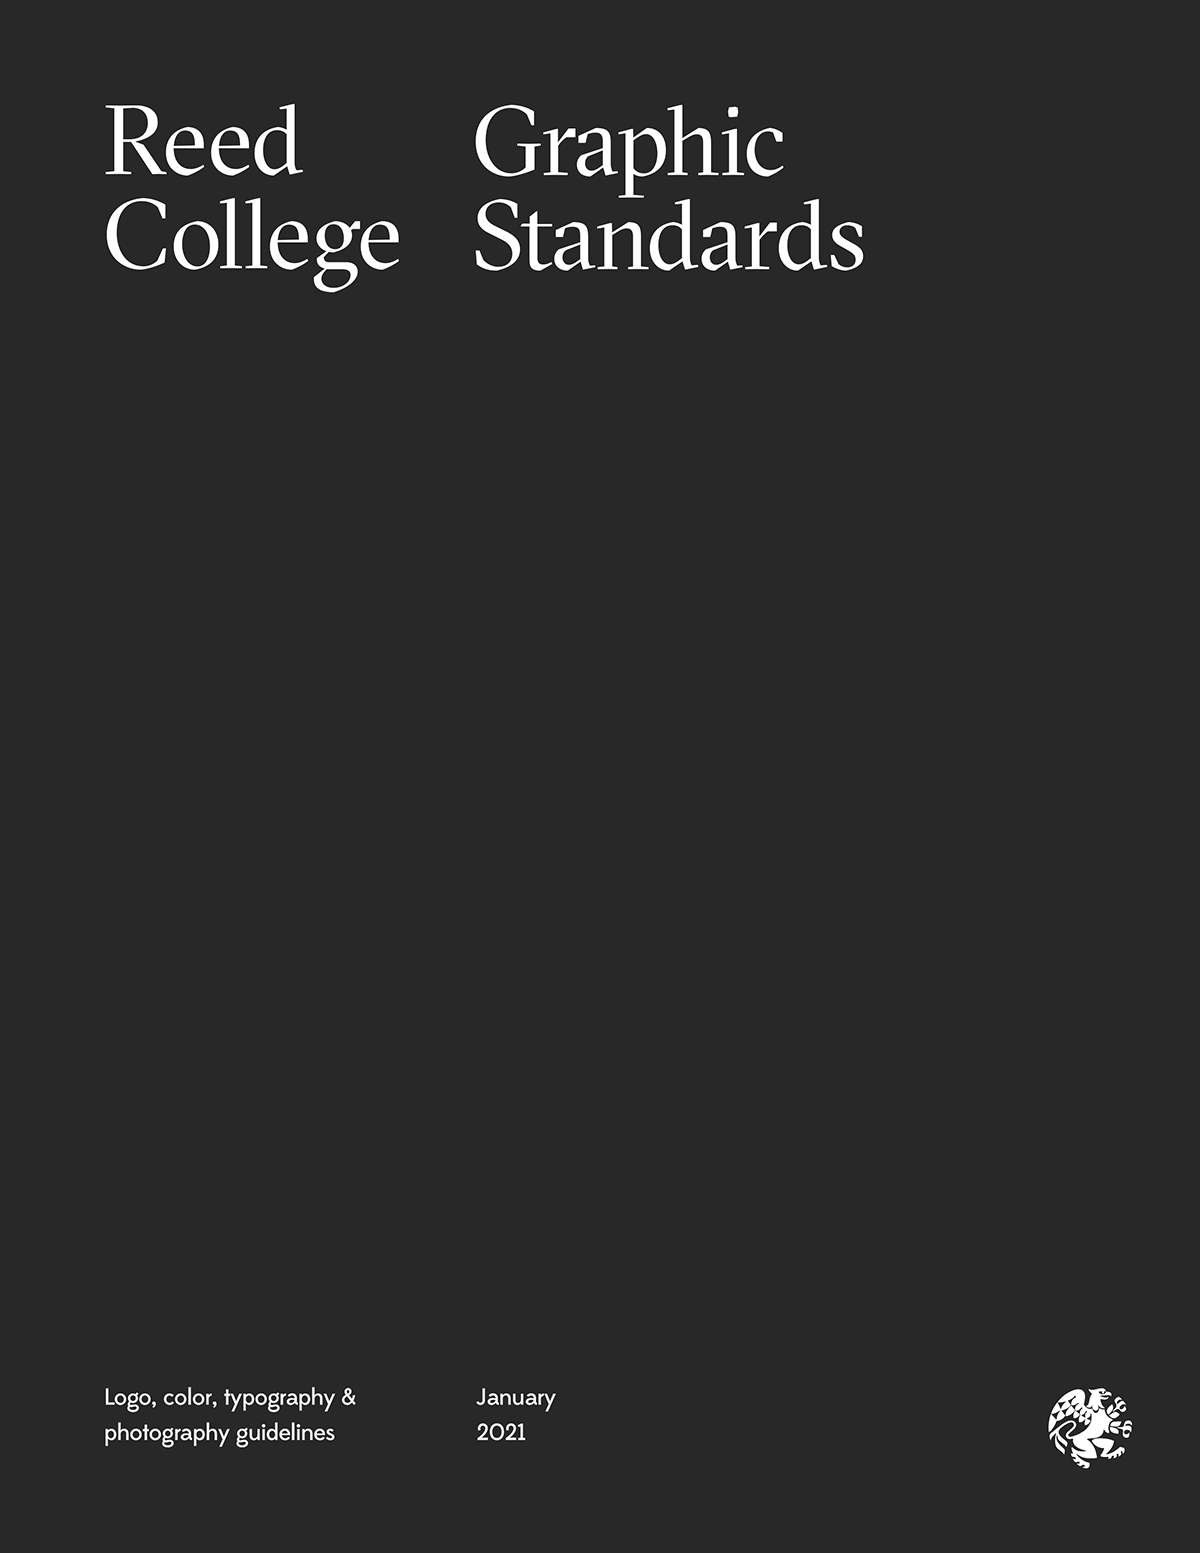 Reed College Graphic Standards cover art